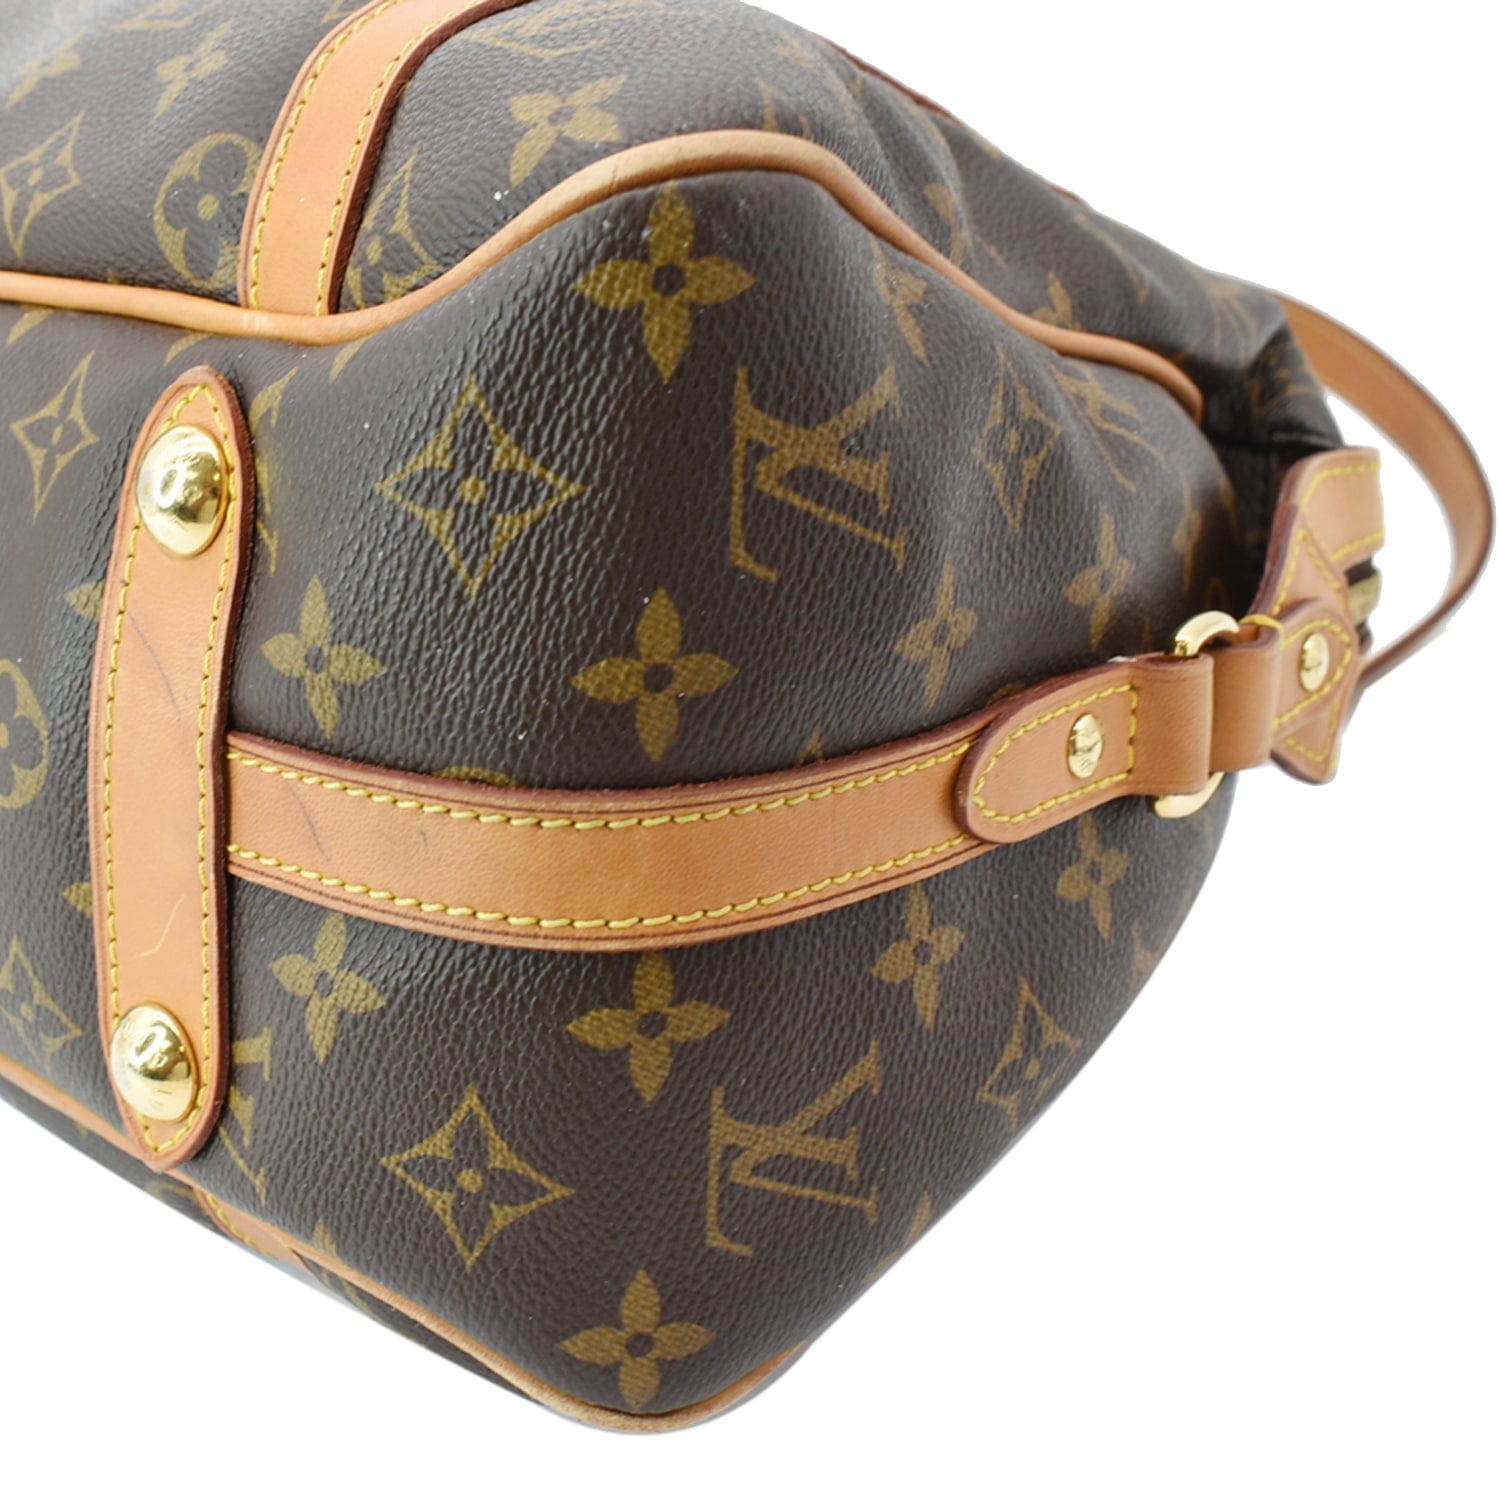 LOUIS VUITTON shoulder bag STRESA PM MONOGRAM, collection 2010. —  Discover Rare and Captivating Sold Pieces, Find Your Collectibles